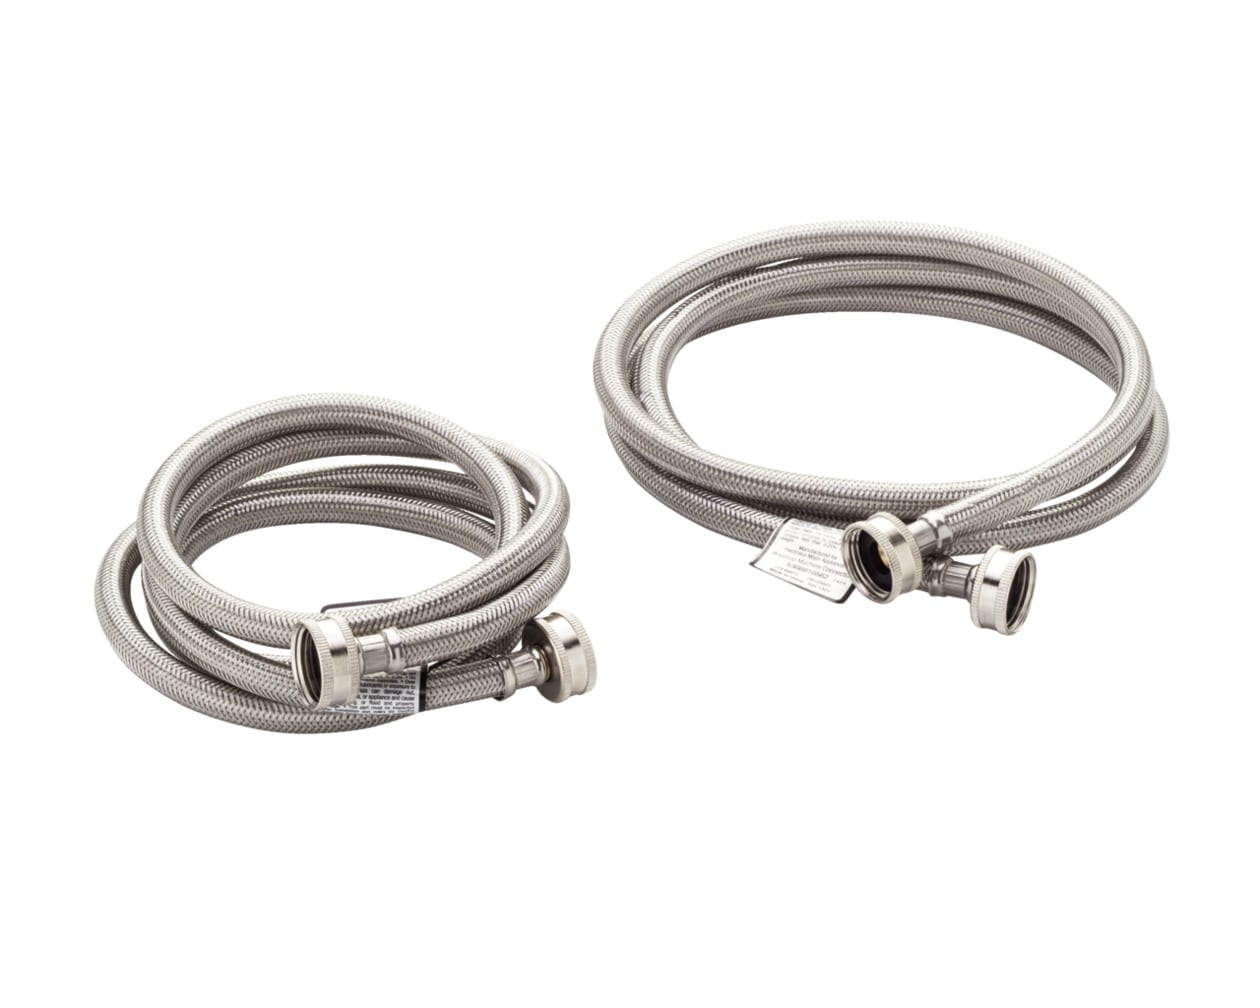 Frigidaire Smart Choice 6' Stainless Steel Braided Fill Hose 2 Pack